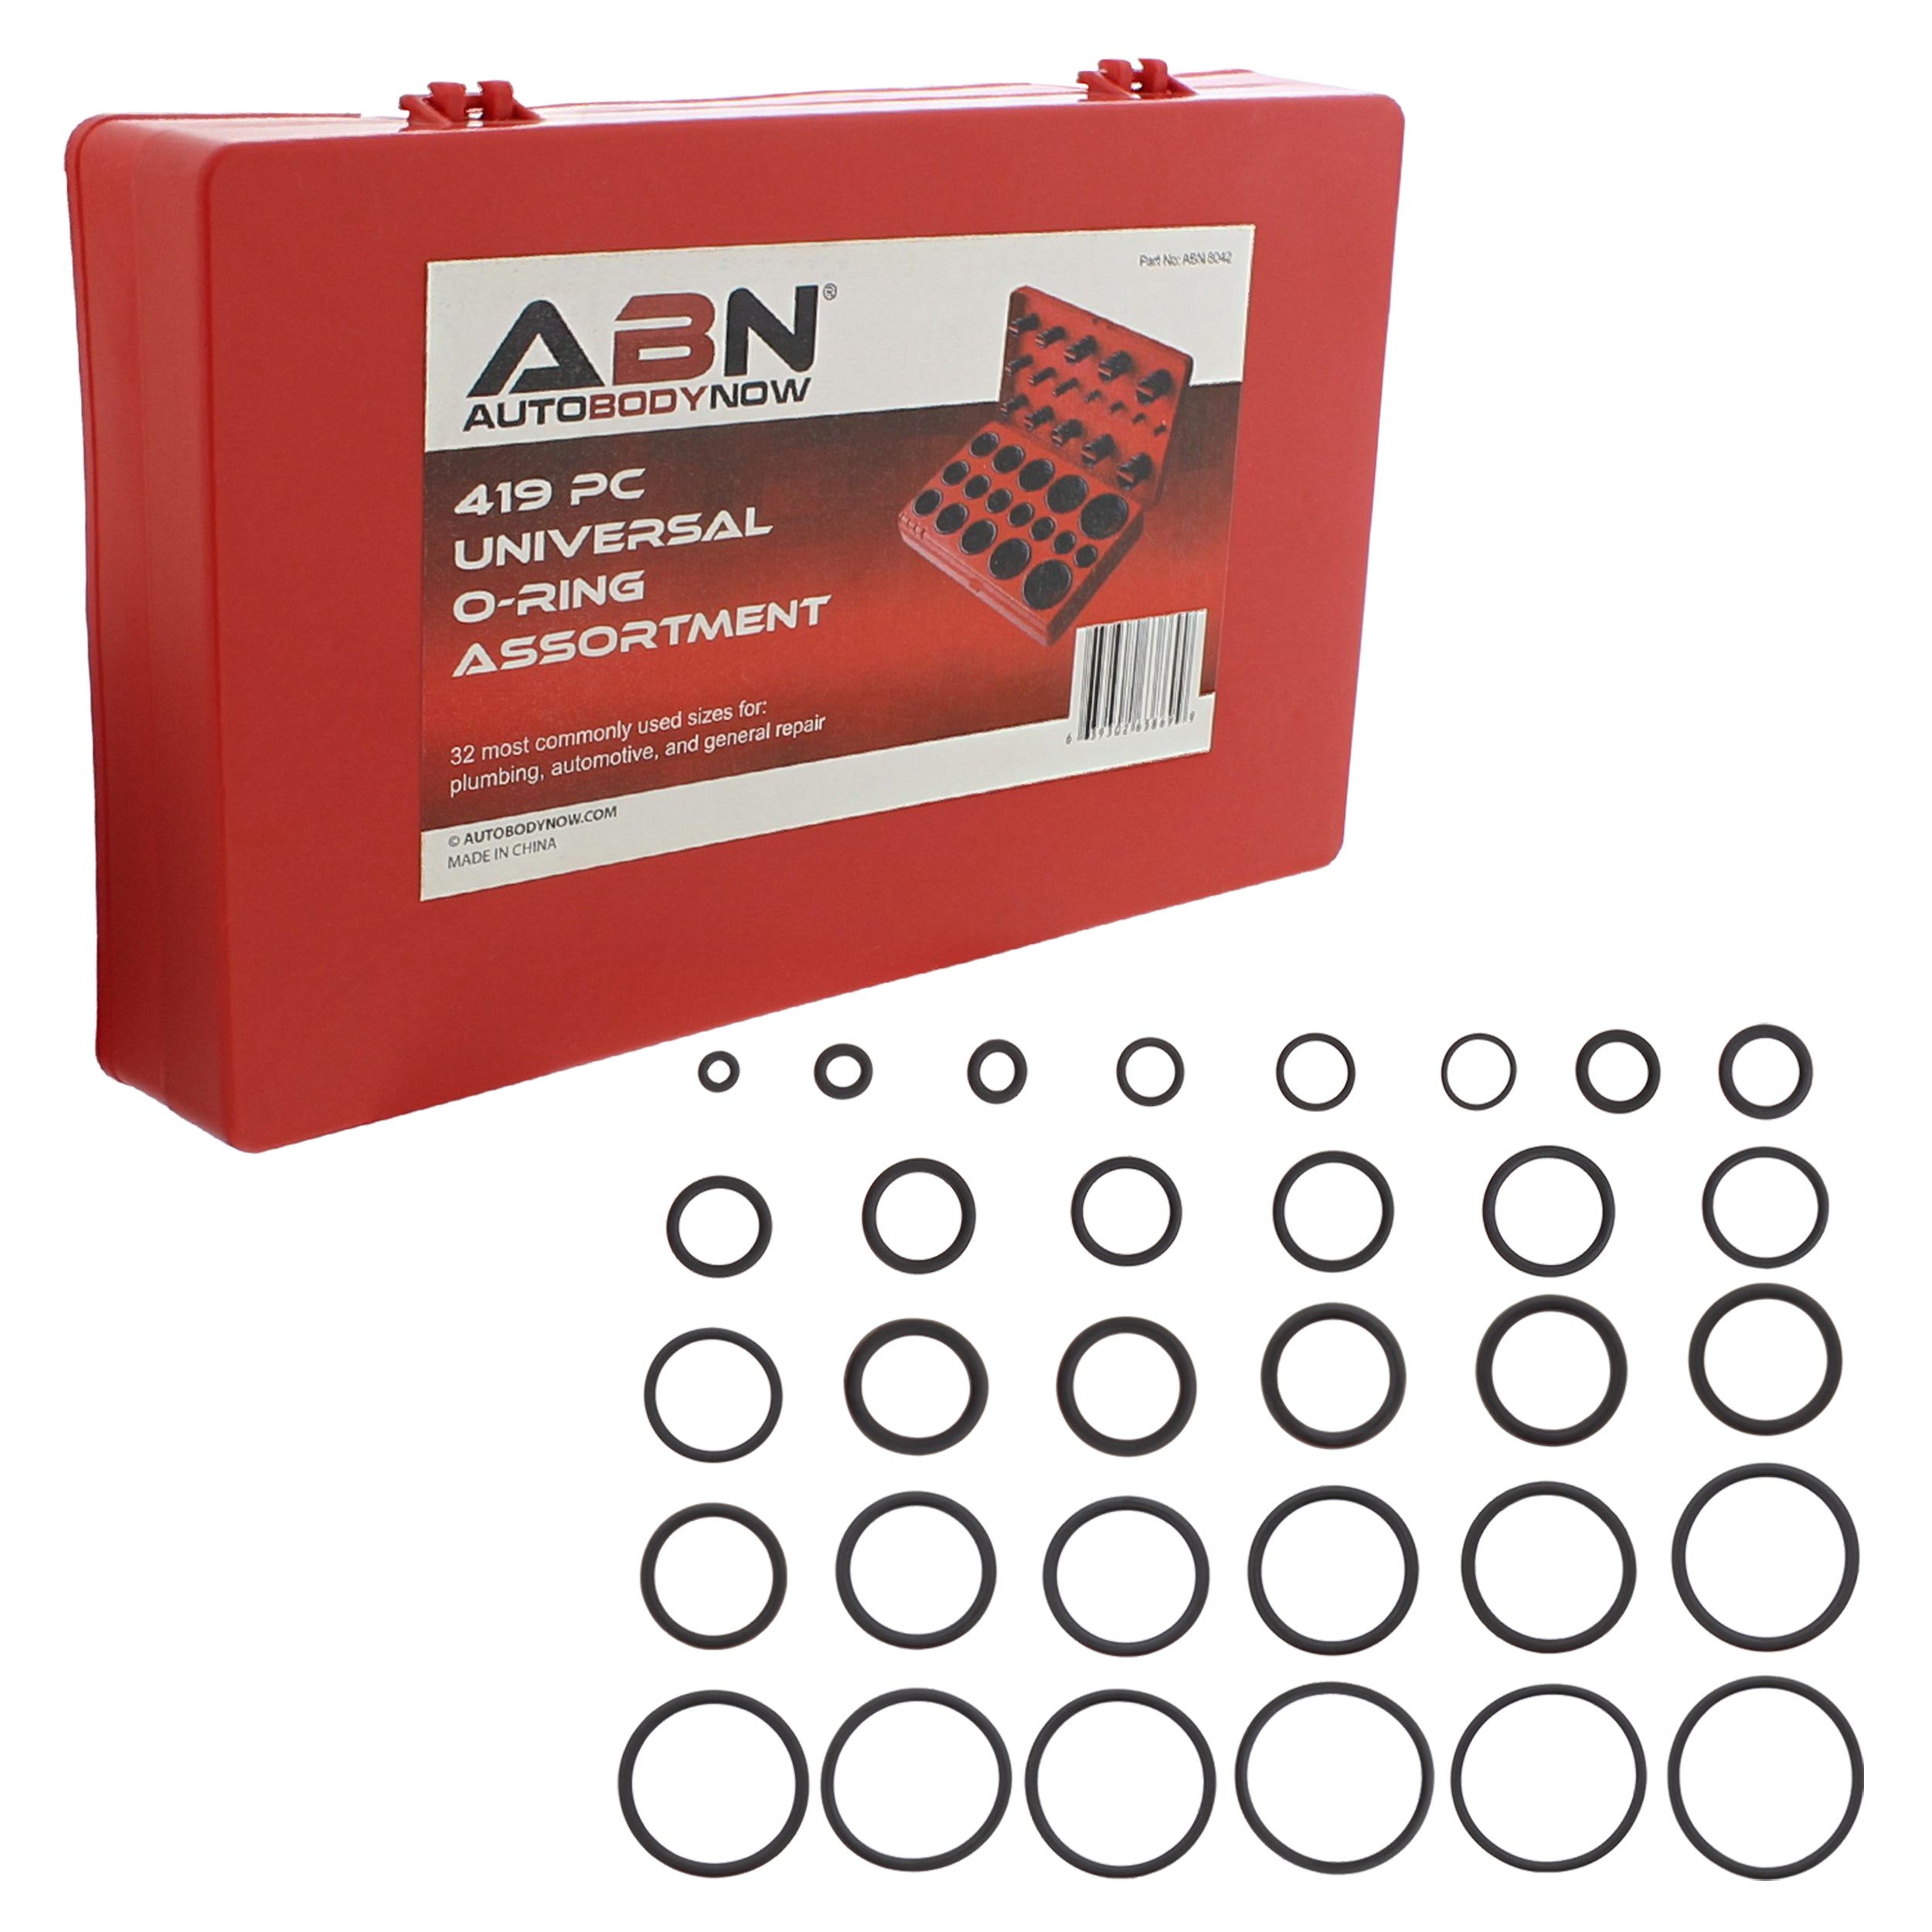 SAE Rubber O Rings Assortment Set - 407Pc Assorted Gasket O Rings